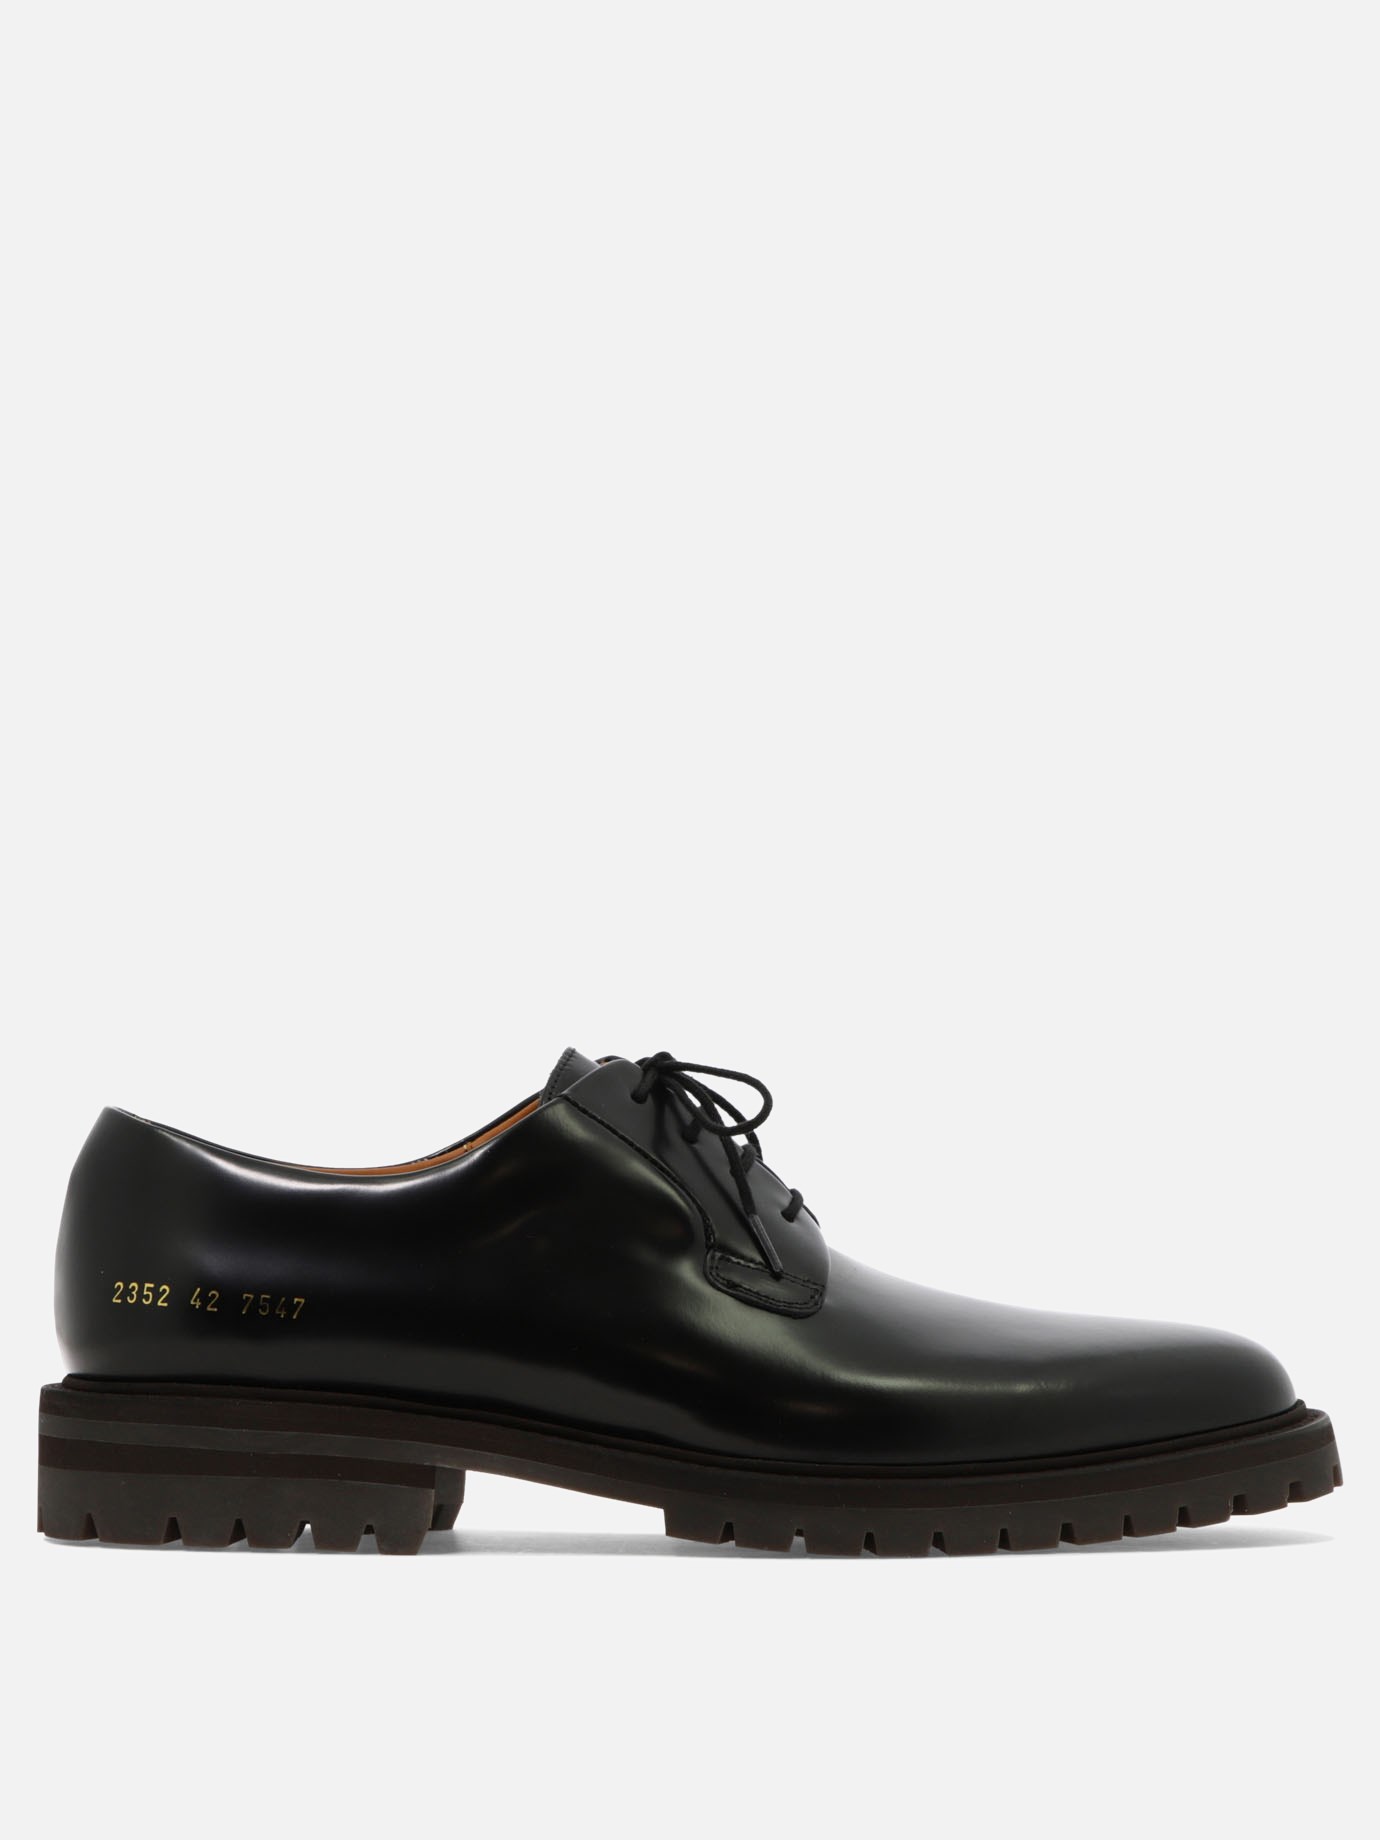  Derby  lace-up shoesby Common Projects - 5